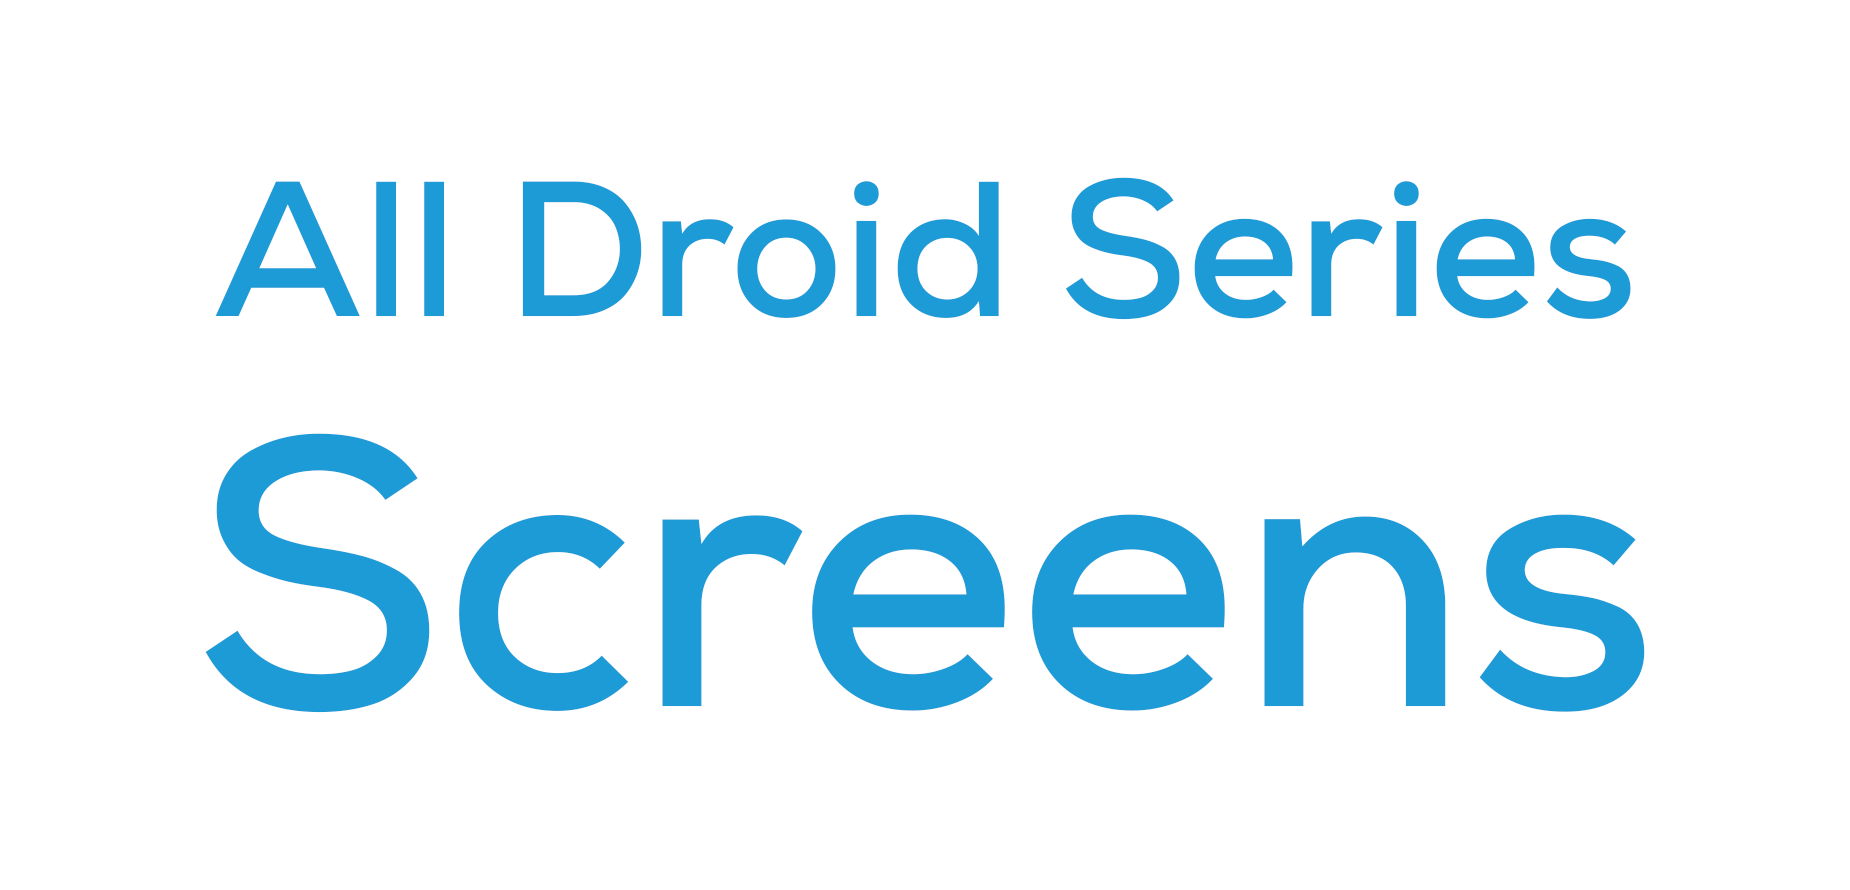 All Droid Series Screens